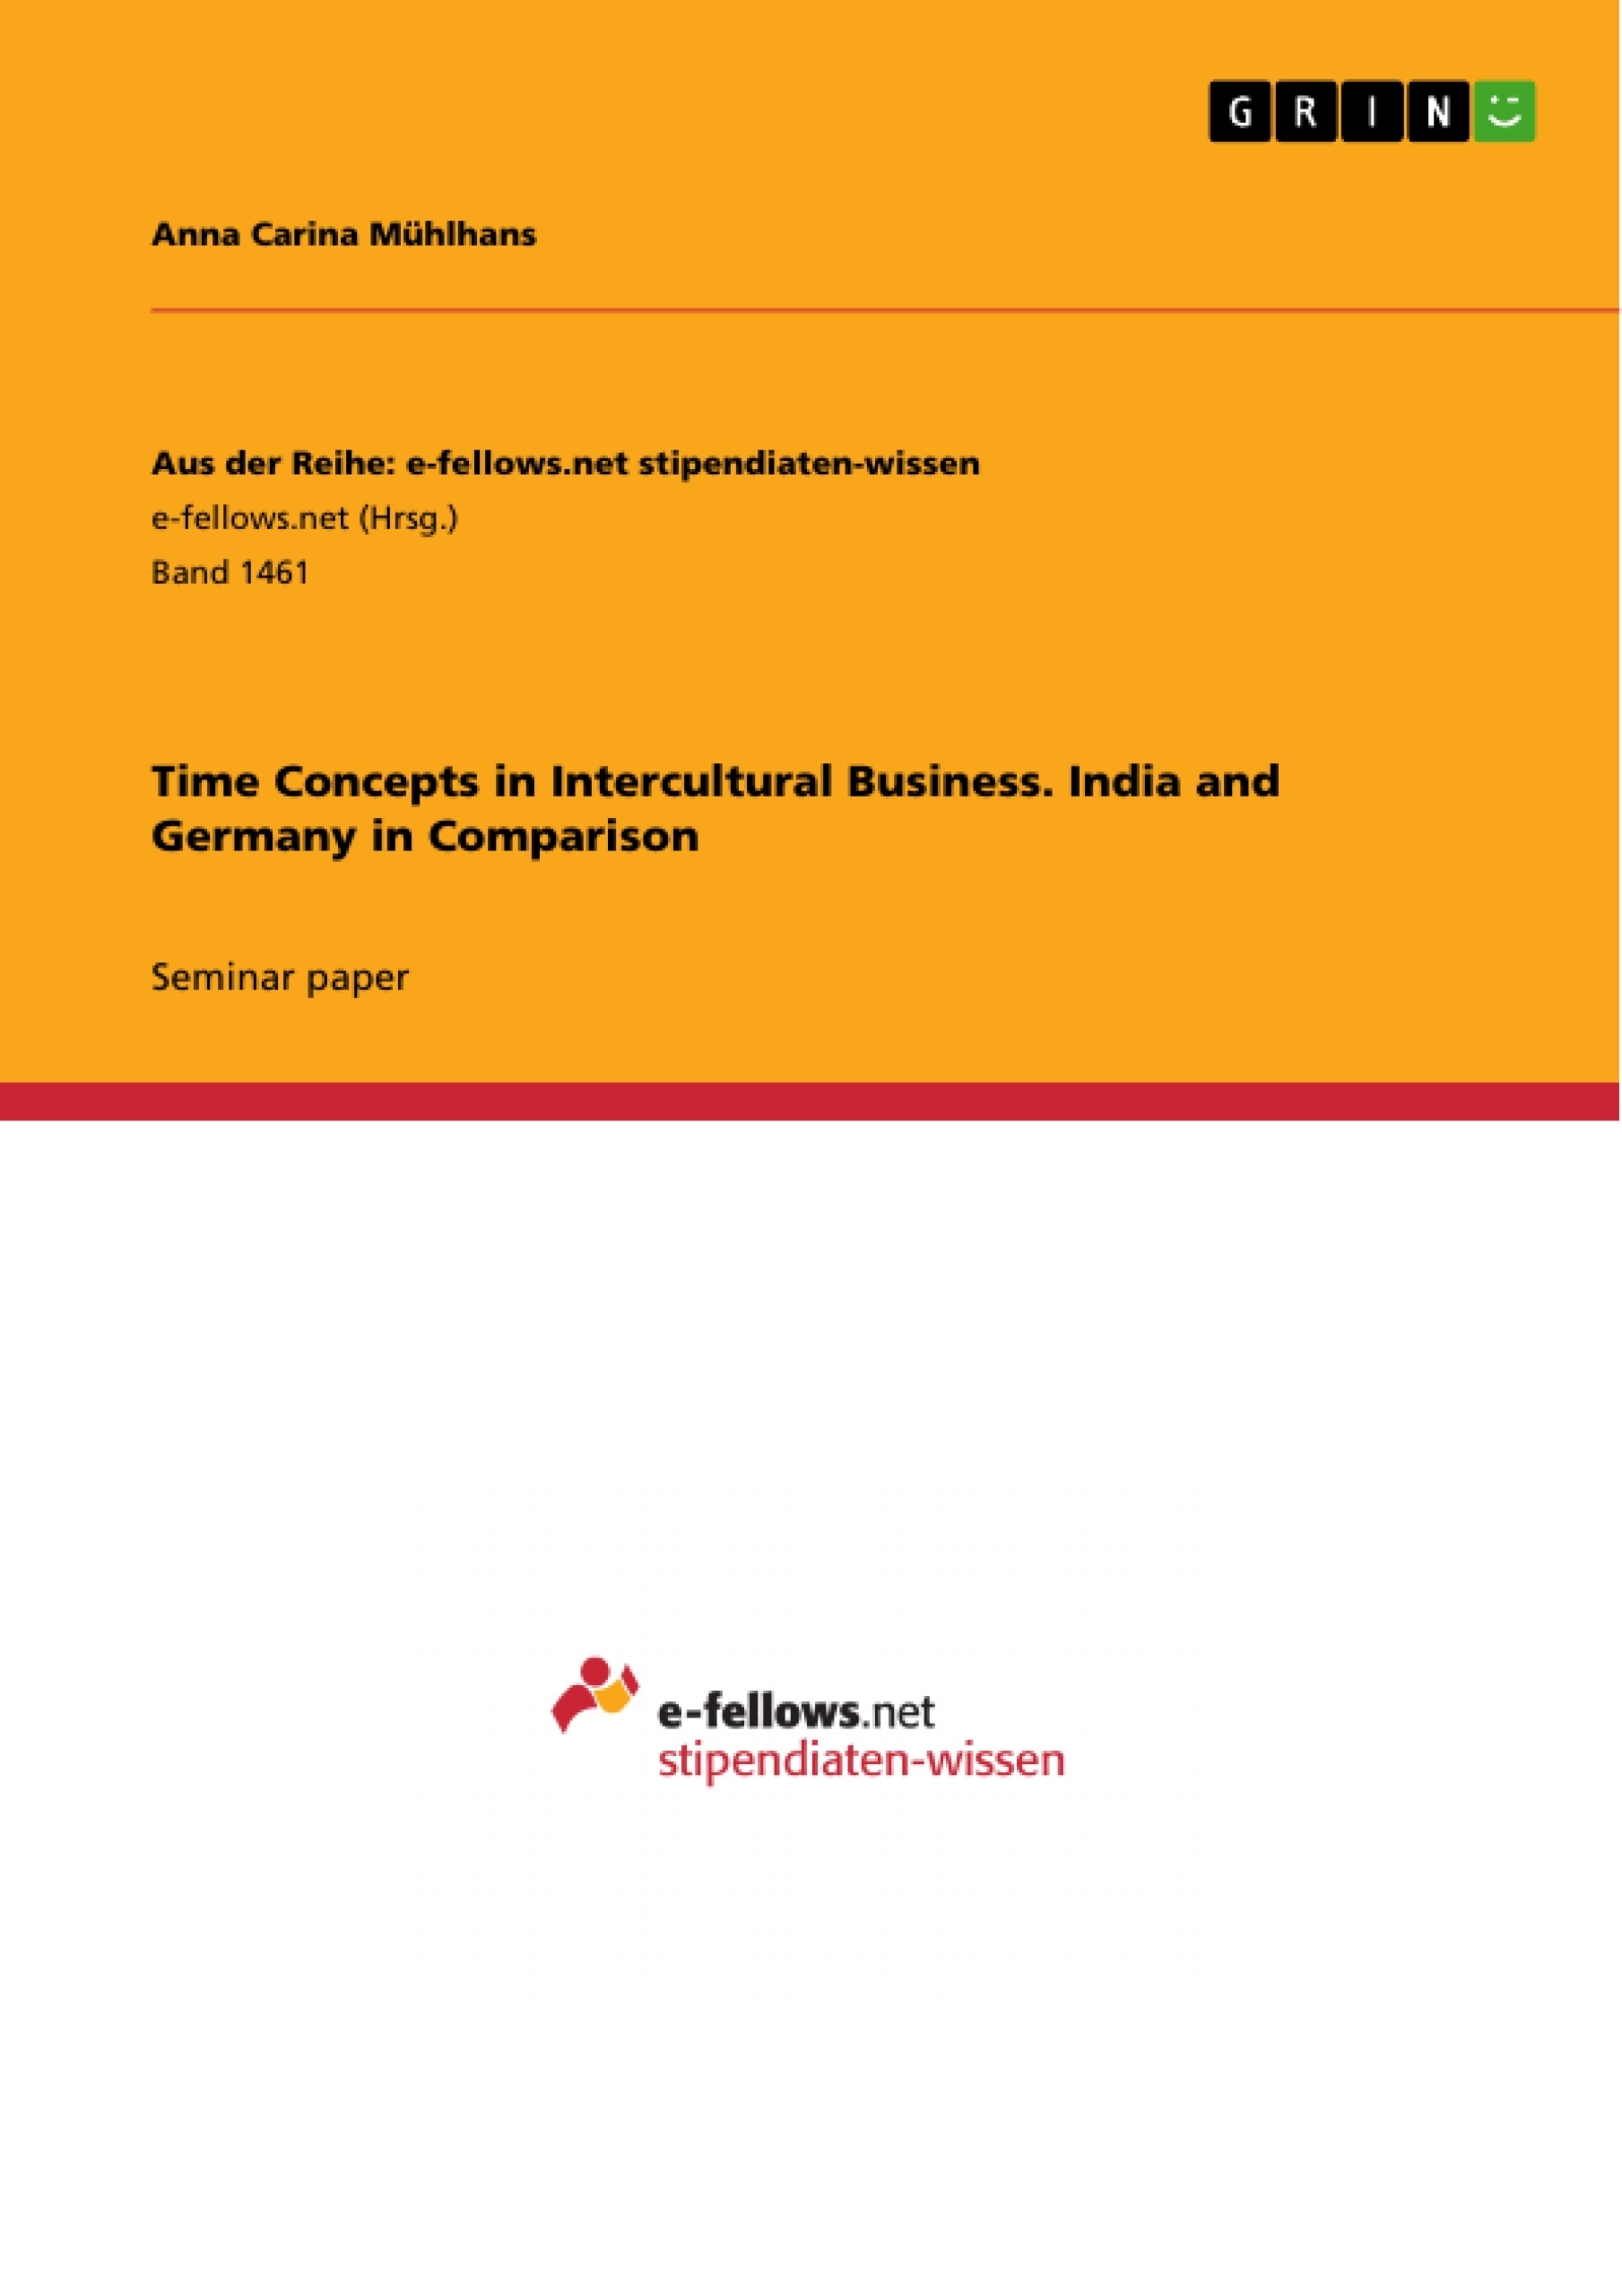 Título: Time Concepts in Intercultural Business. India and Germany in Comparison